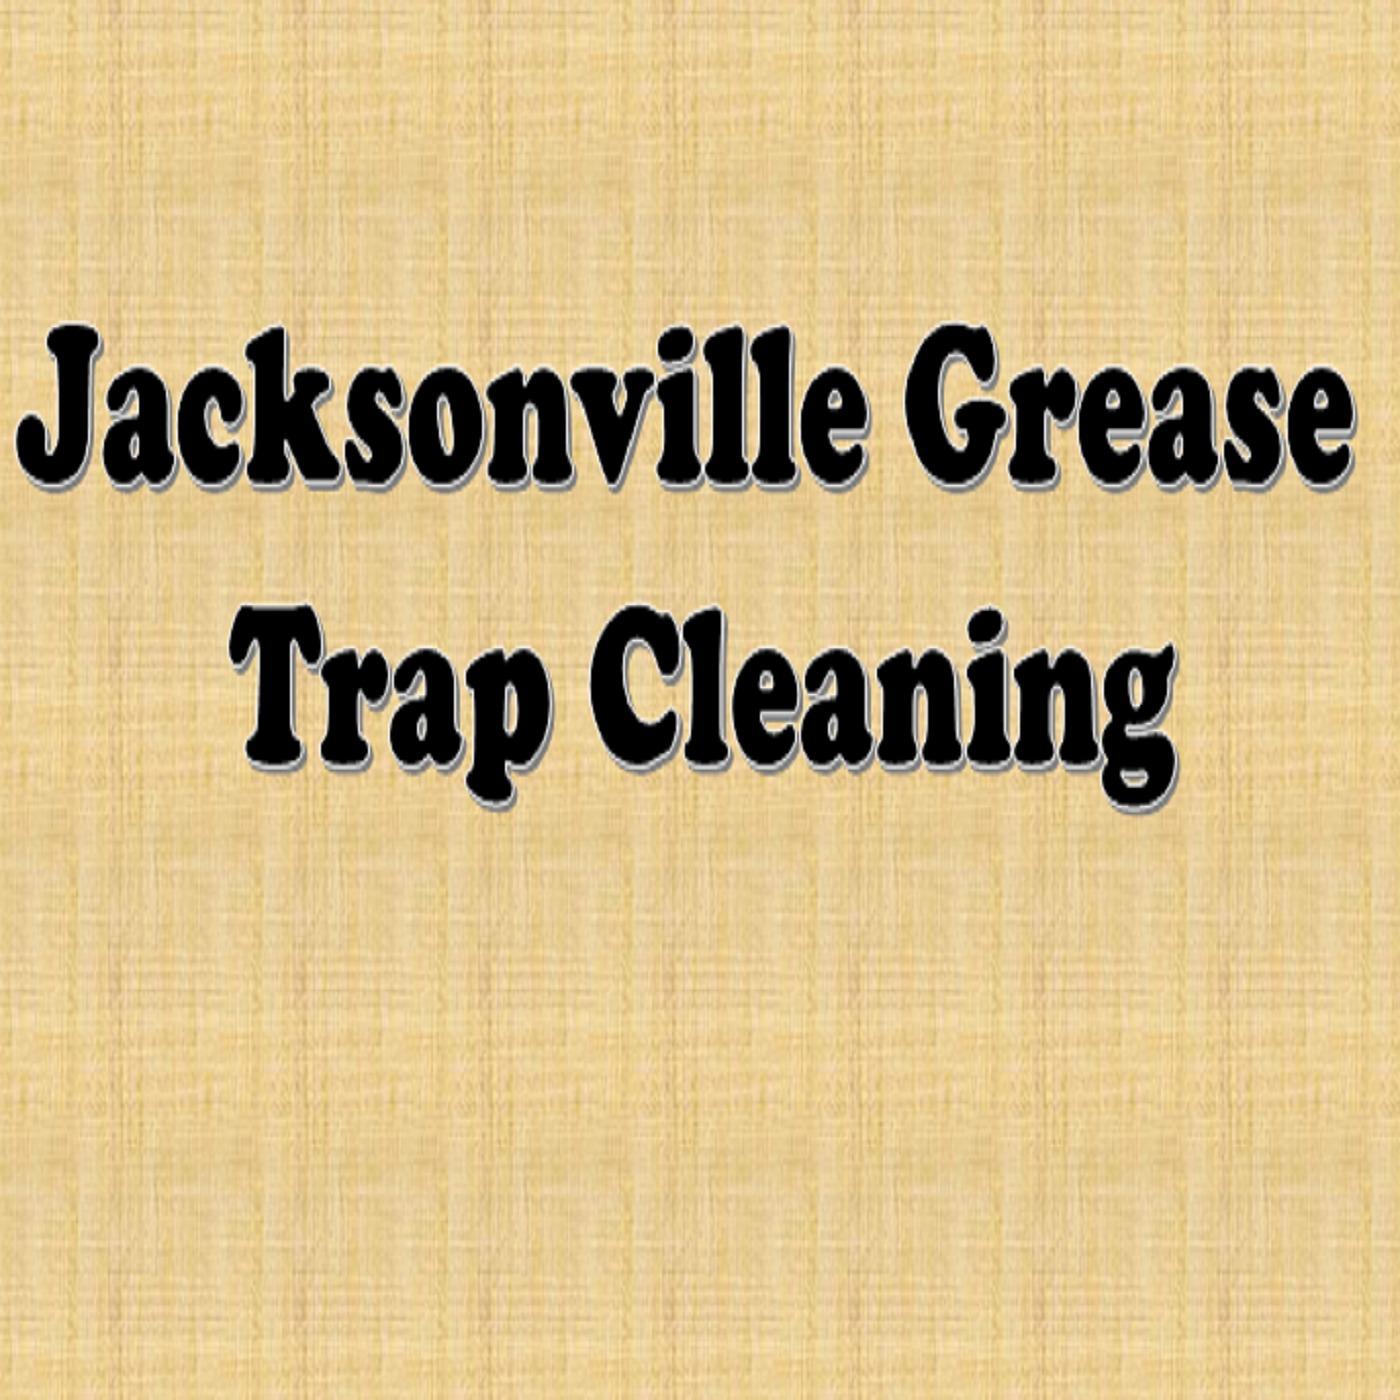 Jacksonville Grease Trap Cleaning